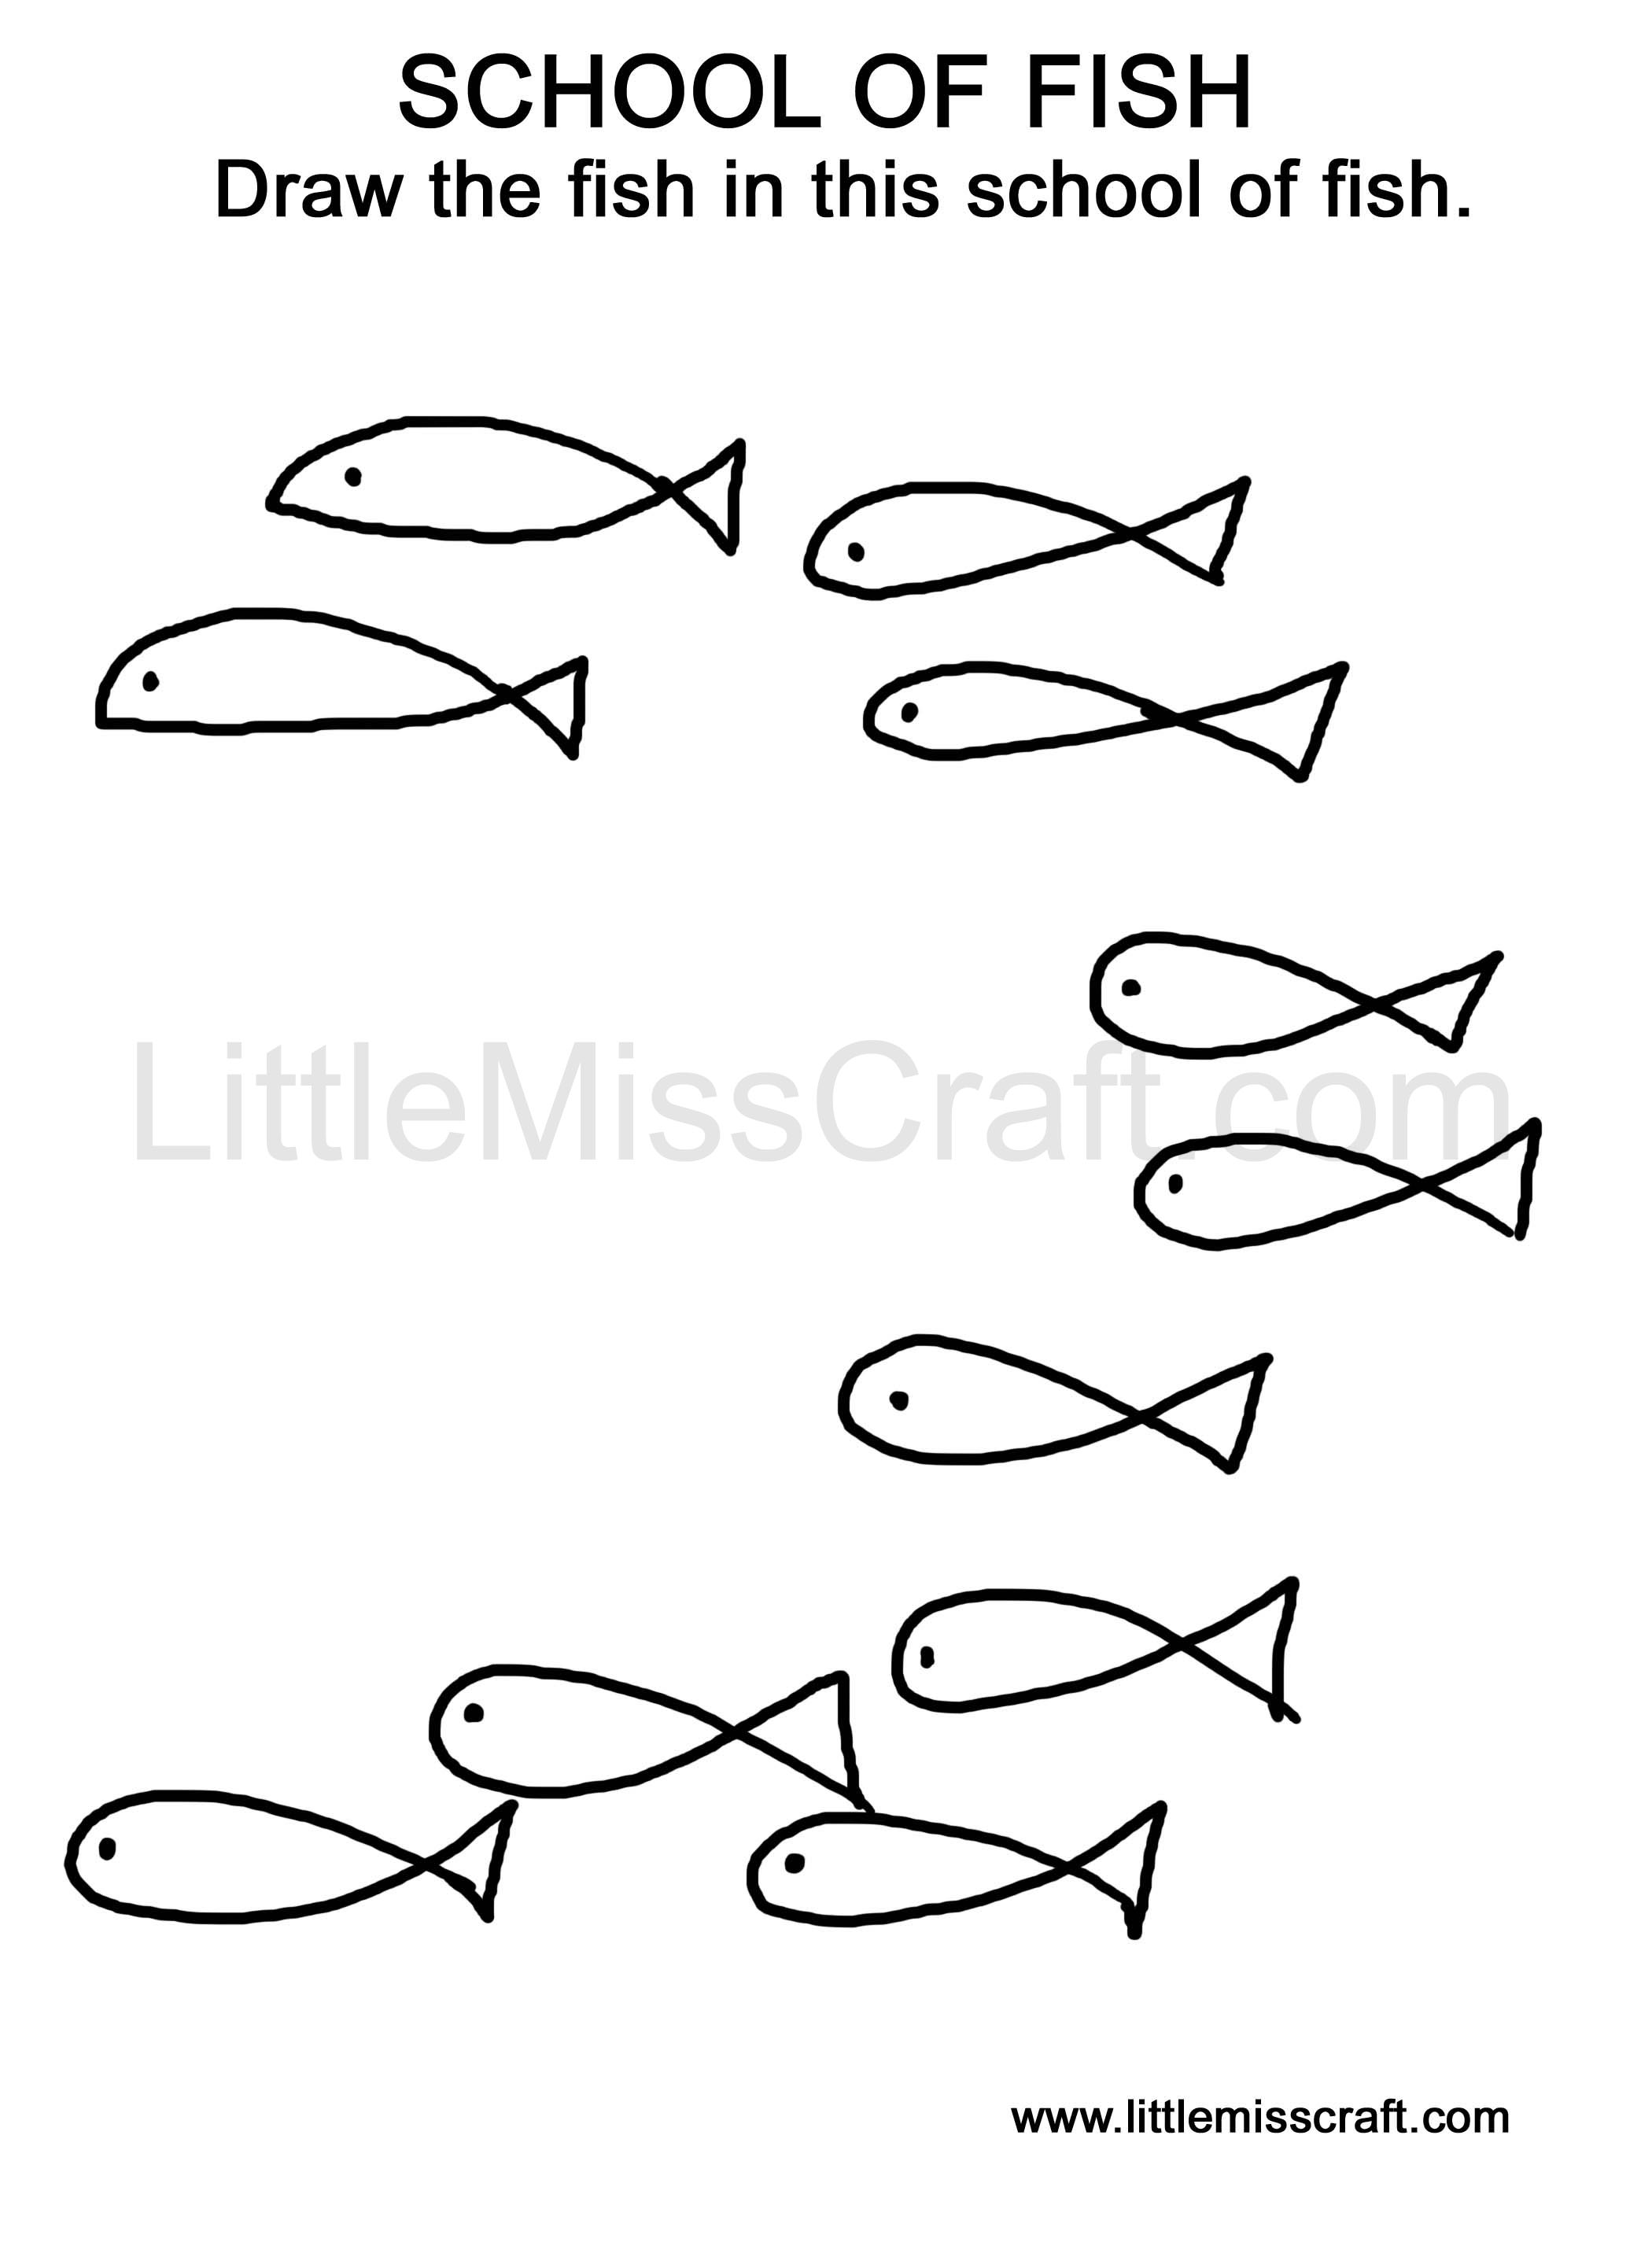 Sea Creatures Fish Doodle Coloring Page